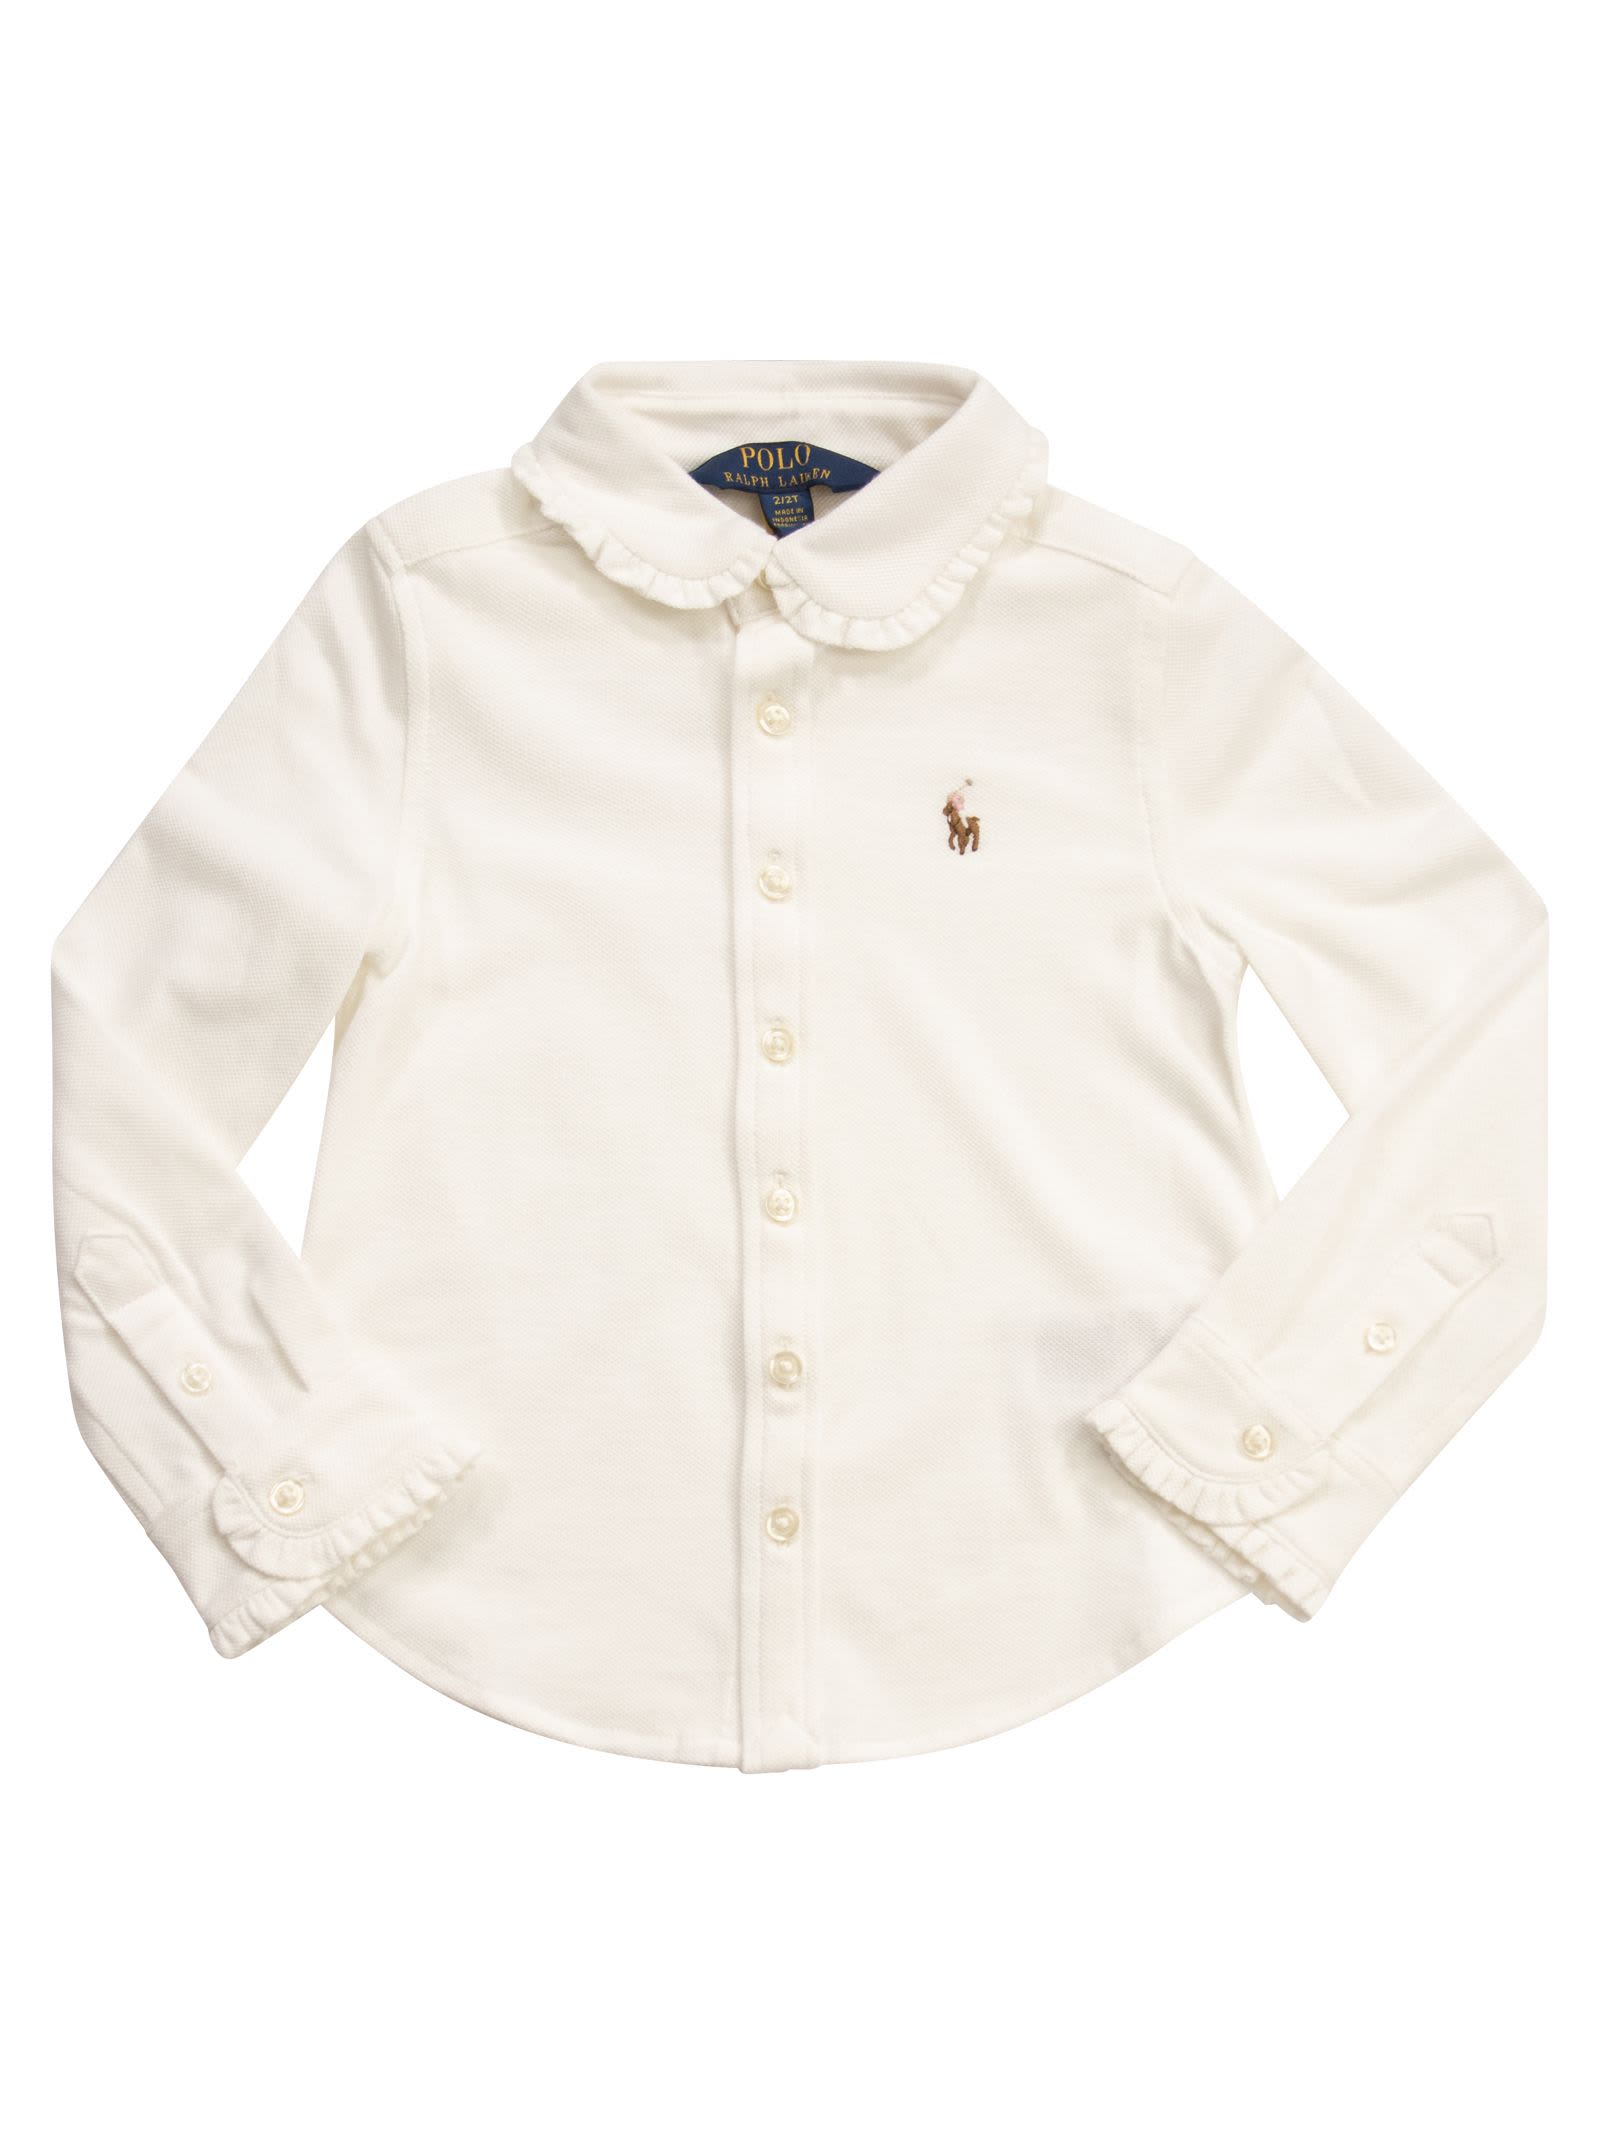 Polo Ralph Lauren Kids' Knitted Oxford Shirt In White